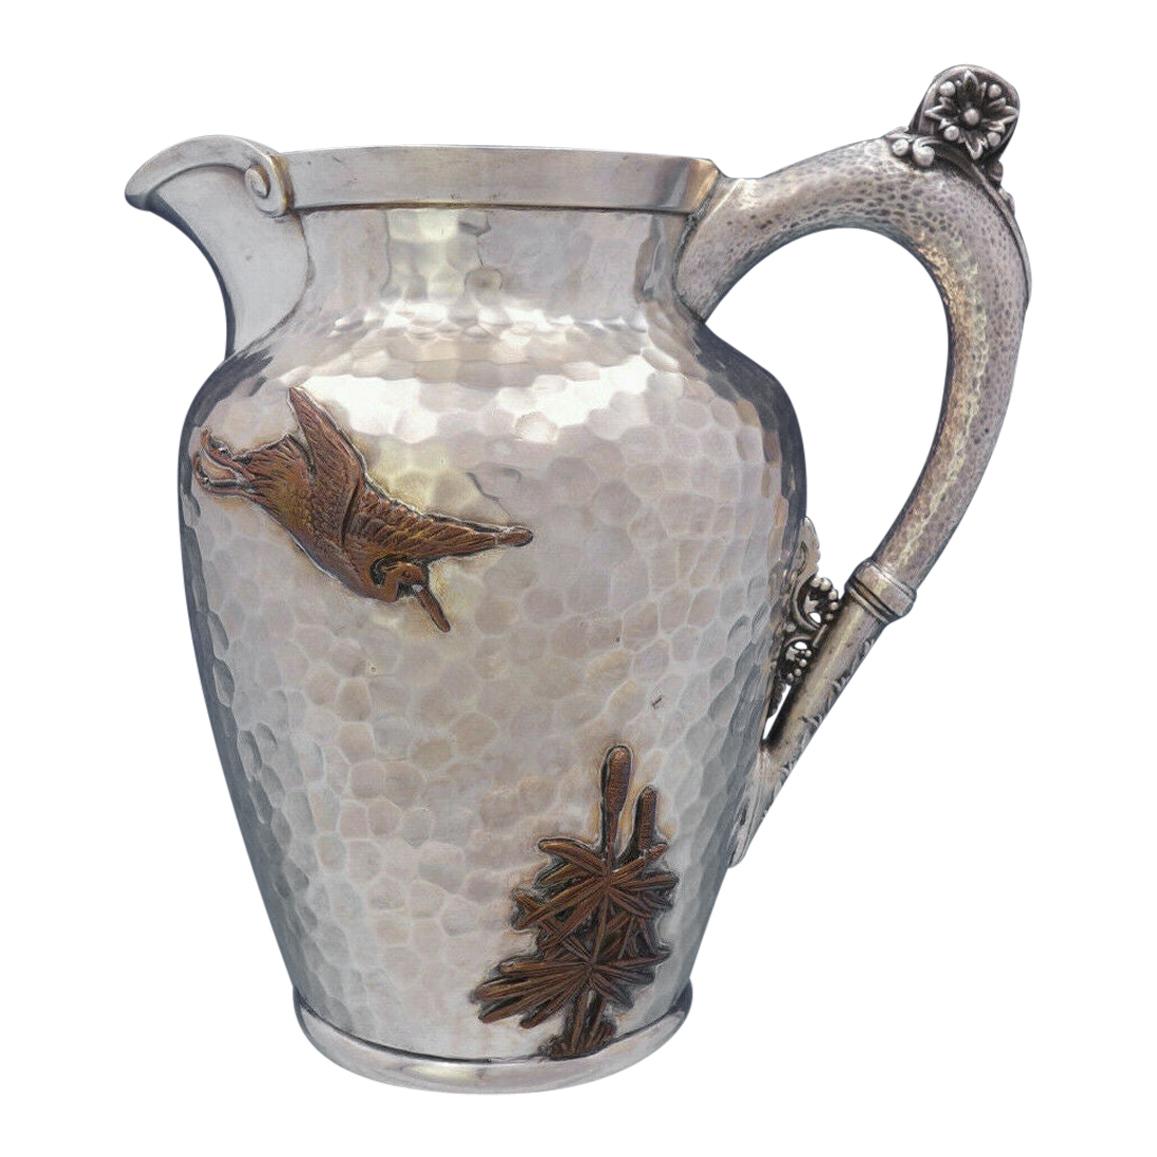 Aesthetic Mixed Metals Gorham Sterling Silver Water Pitcher Applied Bird